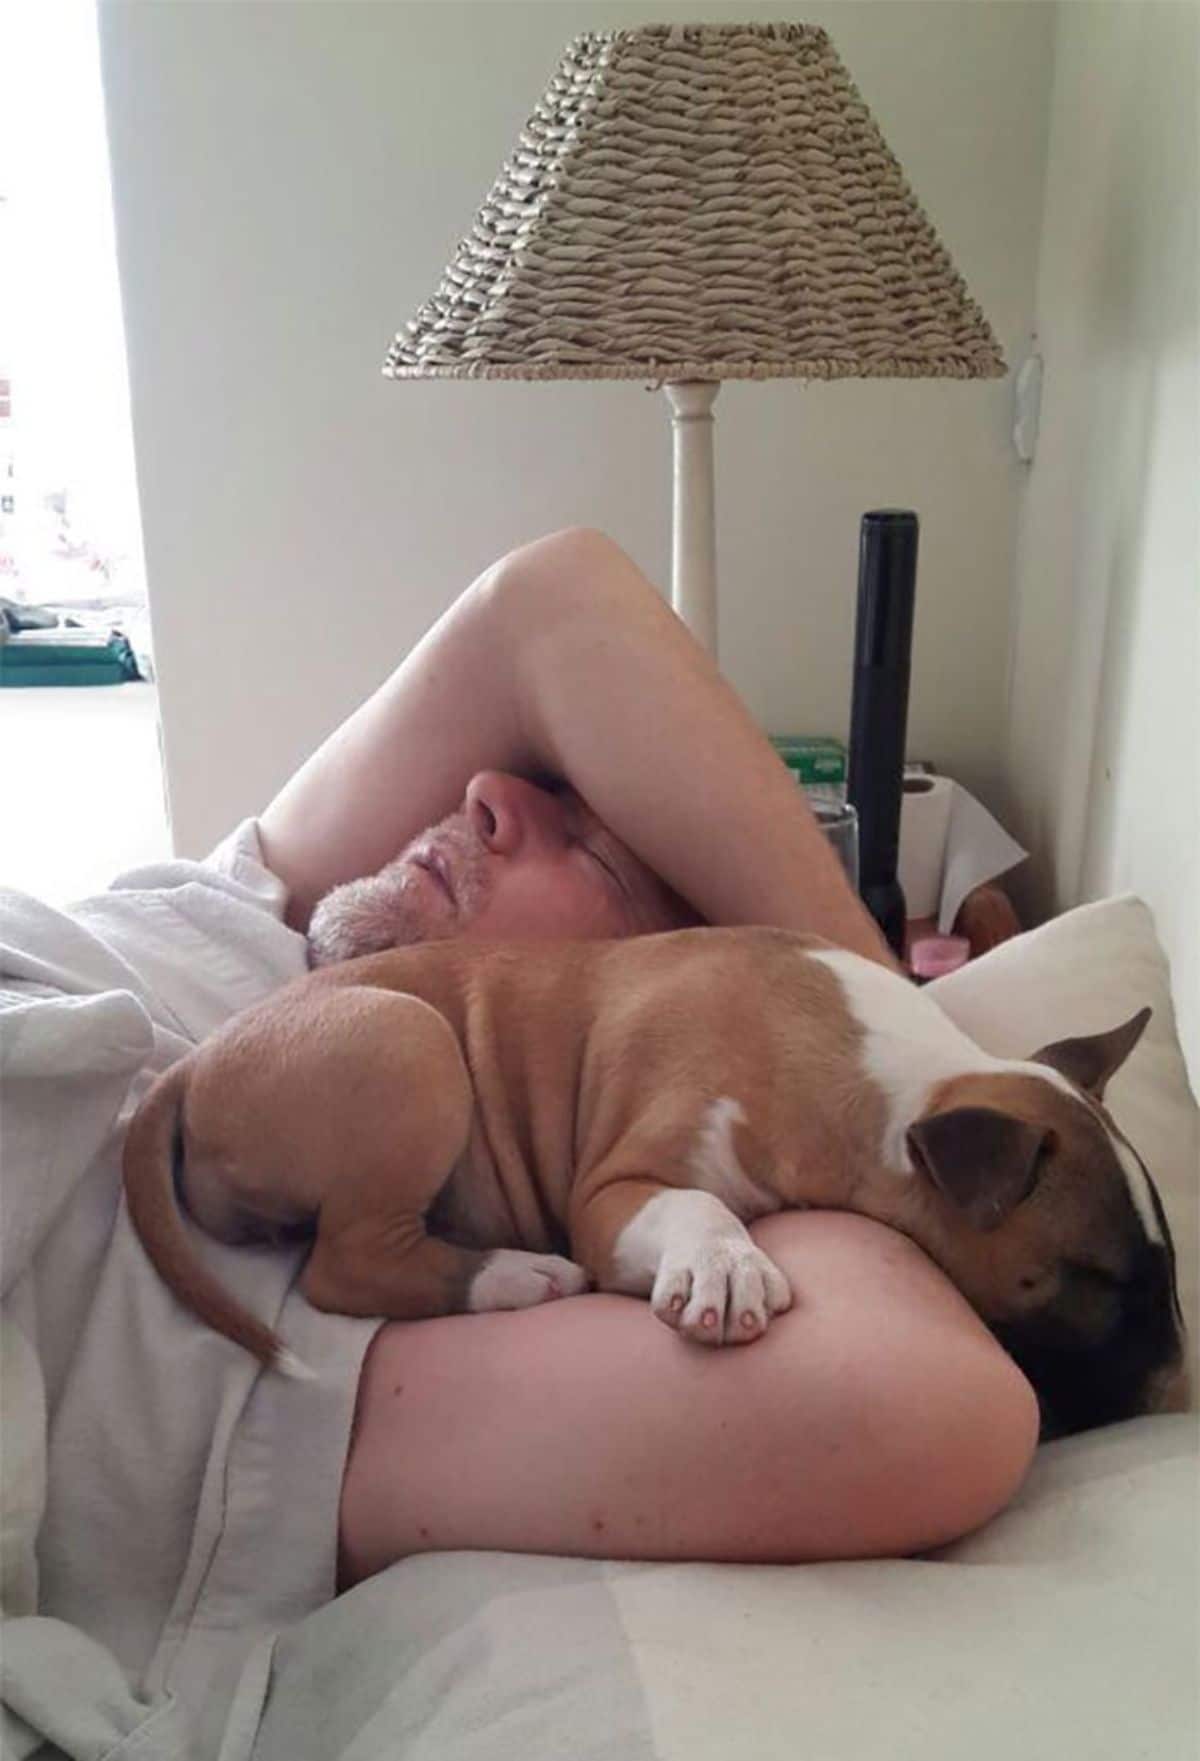 brown and white puppy sleeping on a sleeping old man on a white bed